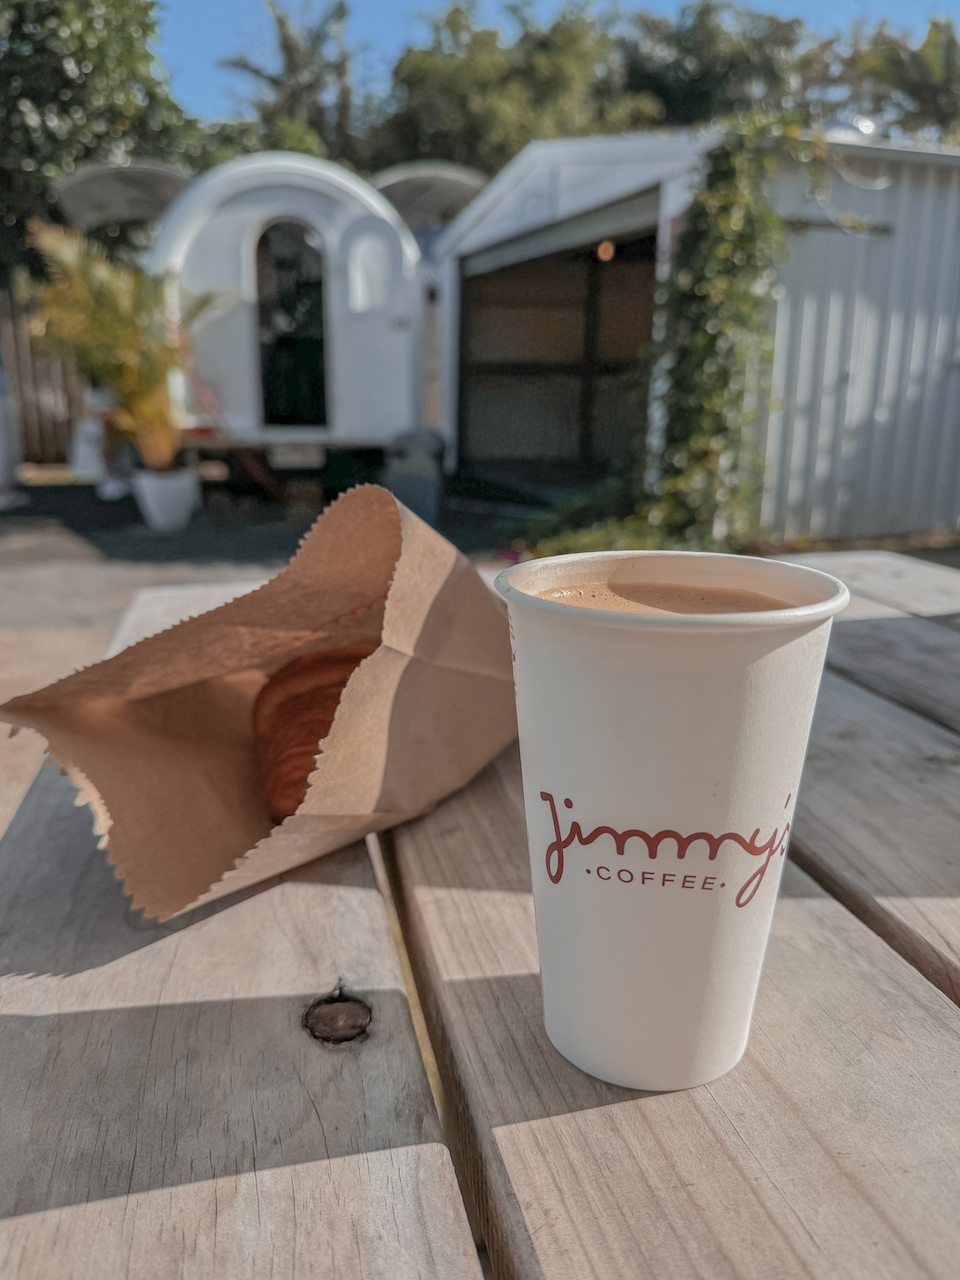 Coffee and a croissant from Jimmy's Coffee - Byron Bay - New South Wales - Australia